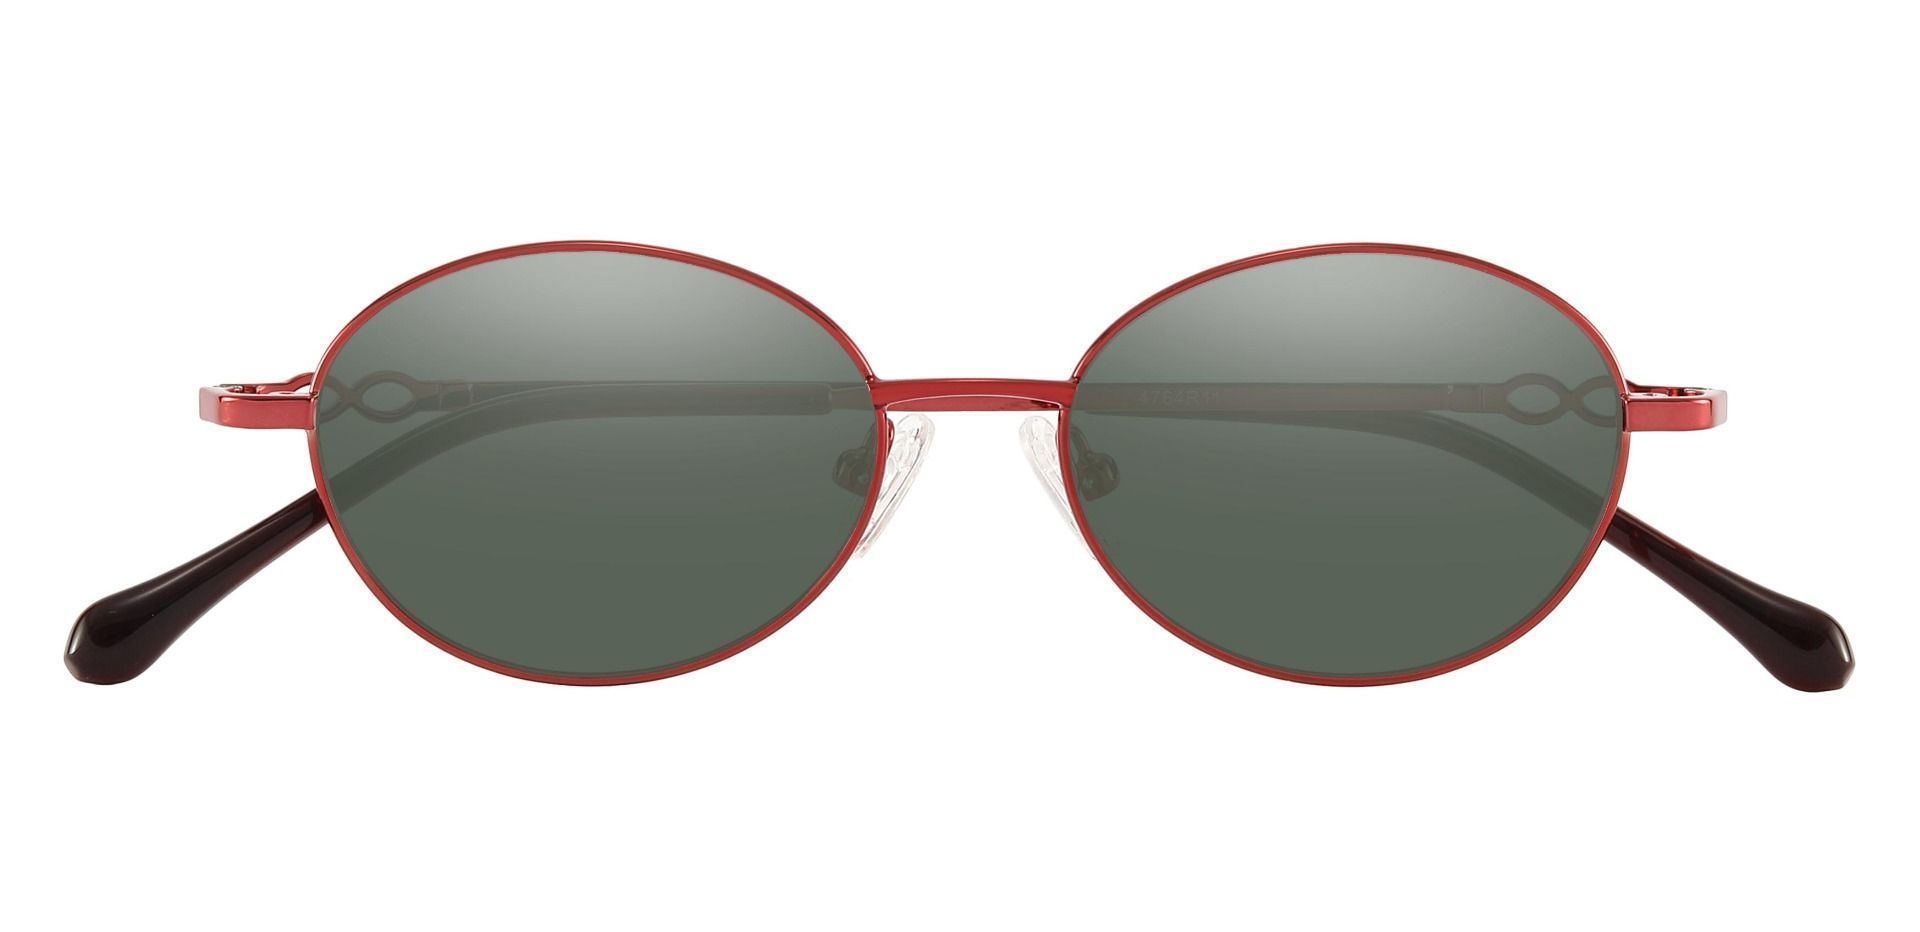 Odyssey Oval Reading Sunglasses - Red Frame With Green Lenses